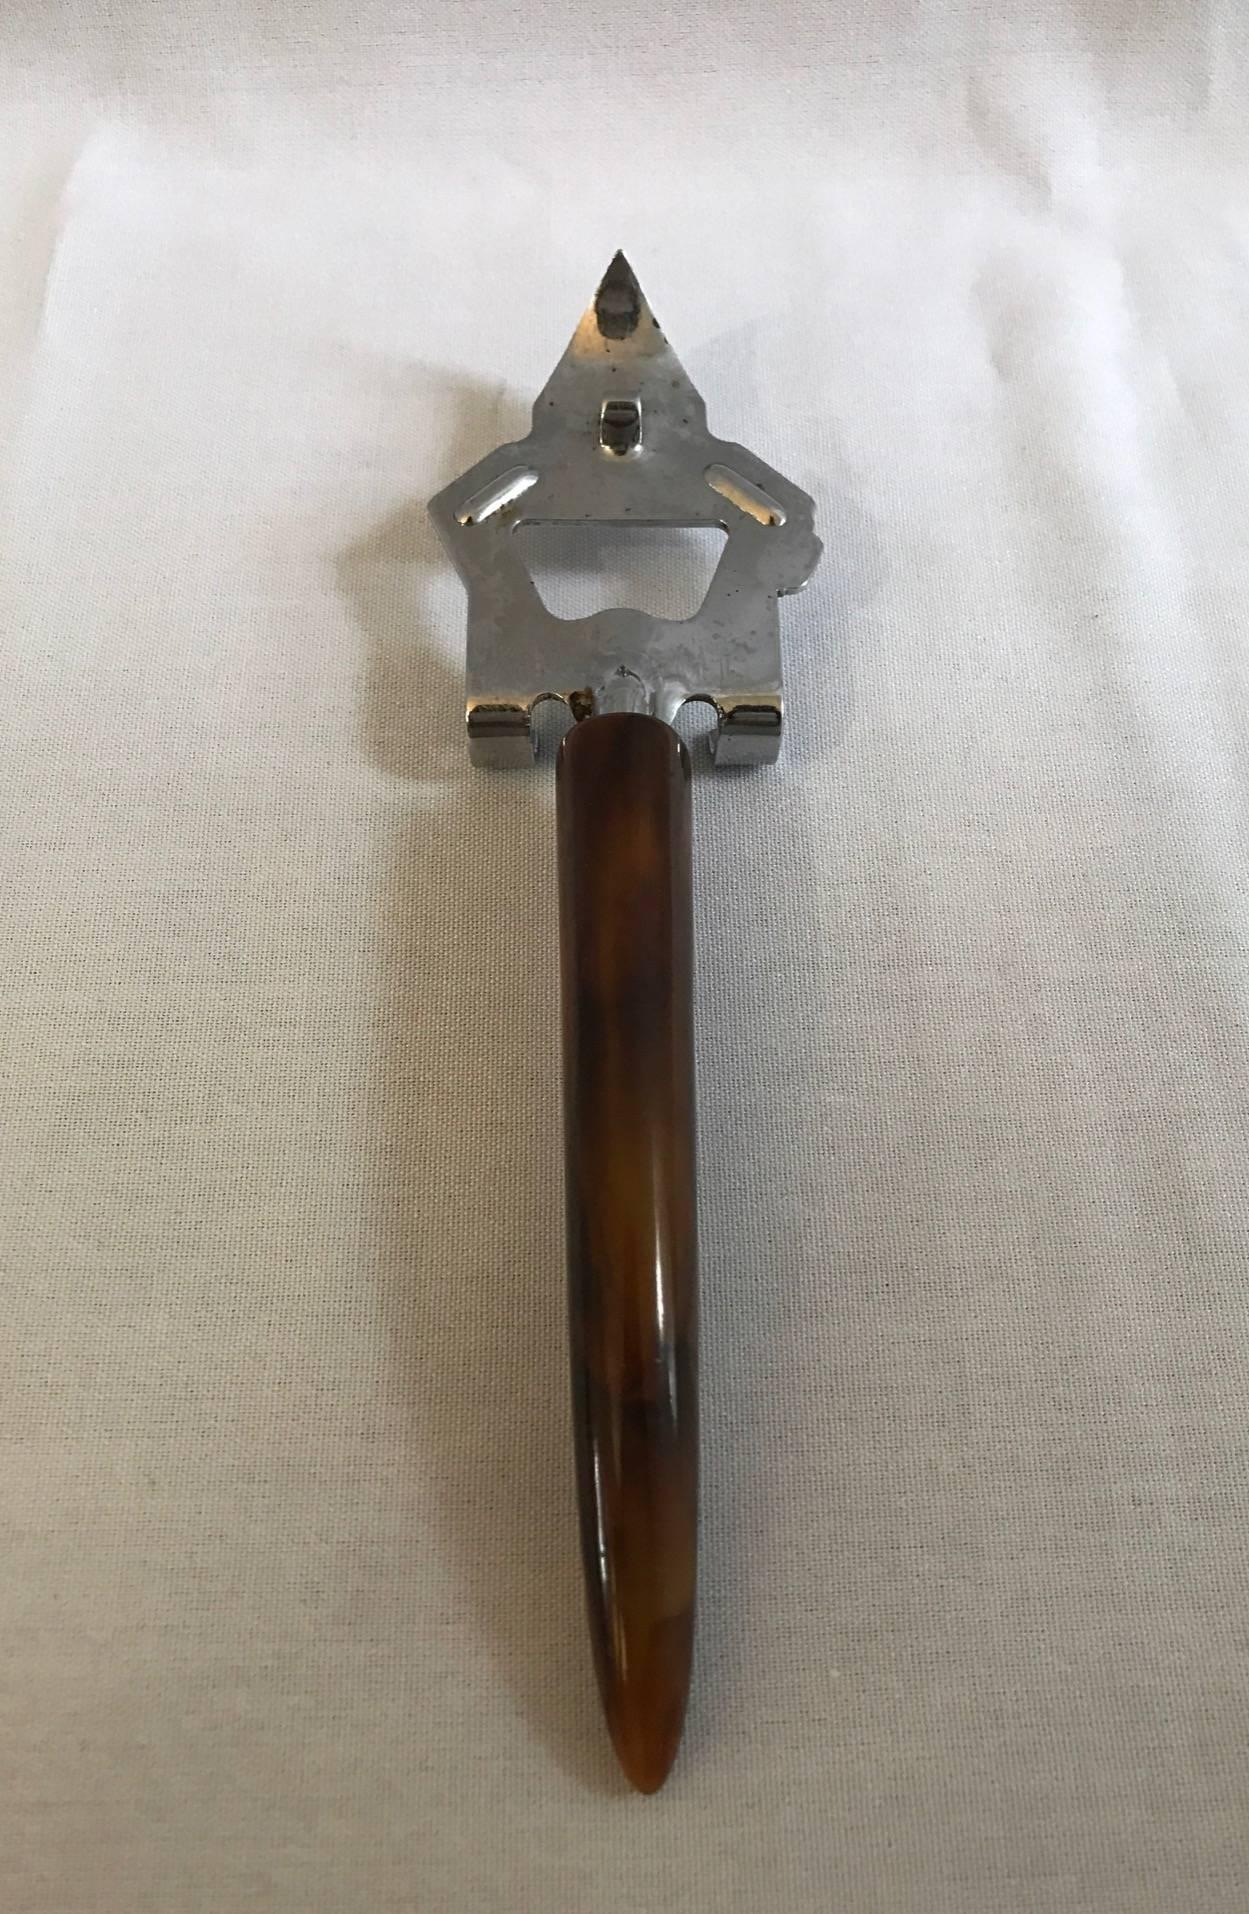 Awesome Ralph Lauren Style Vintage Faux Tortoise Shell  Can Opener- Great Gift! Vintage tortoise shell can opener.  Really cool mad men style. Beer Lover's Unite!  